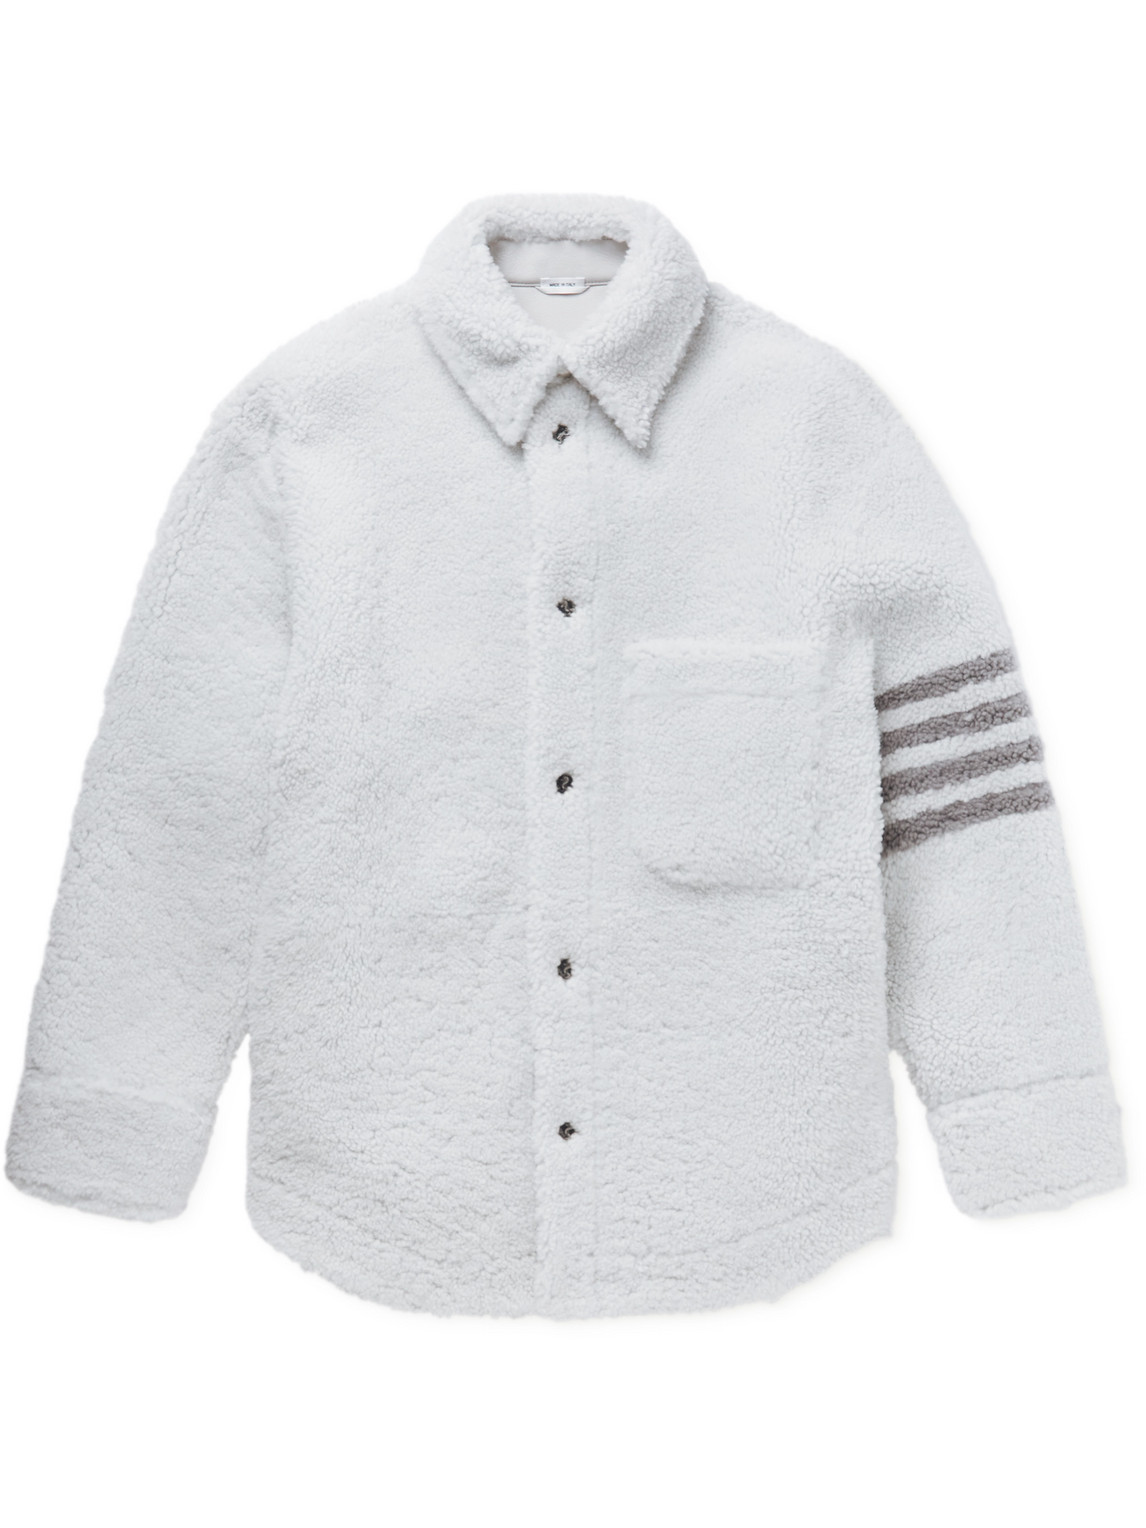 THOM BROWNE OVERSIZED STRIPED SHEARLING JACKET